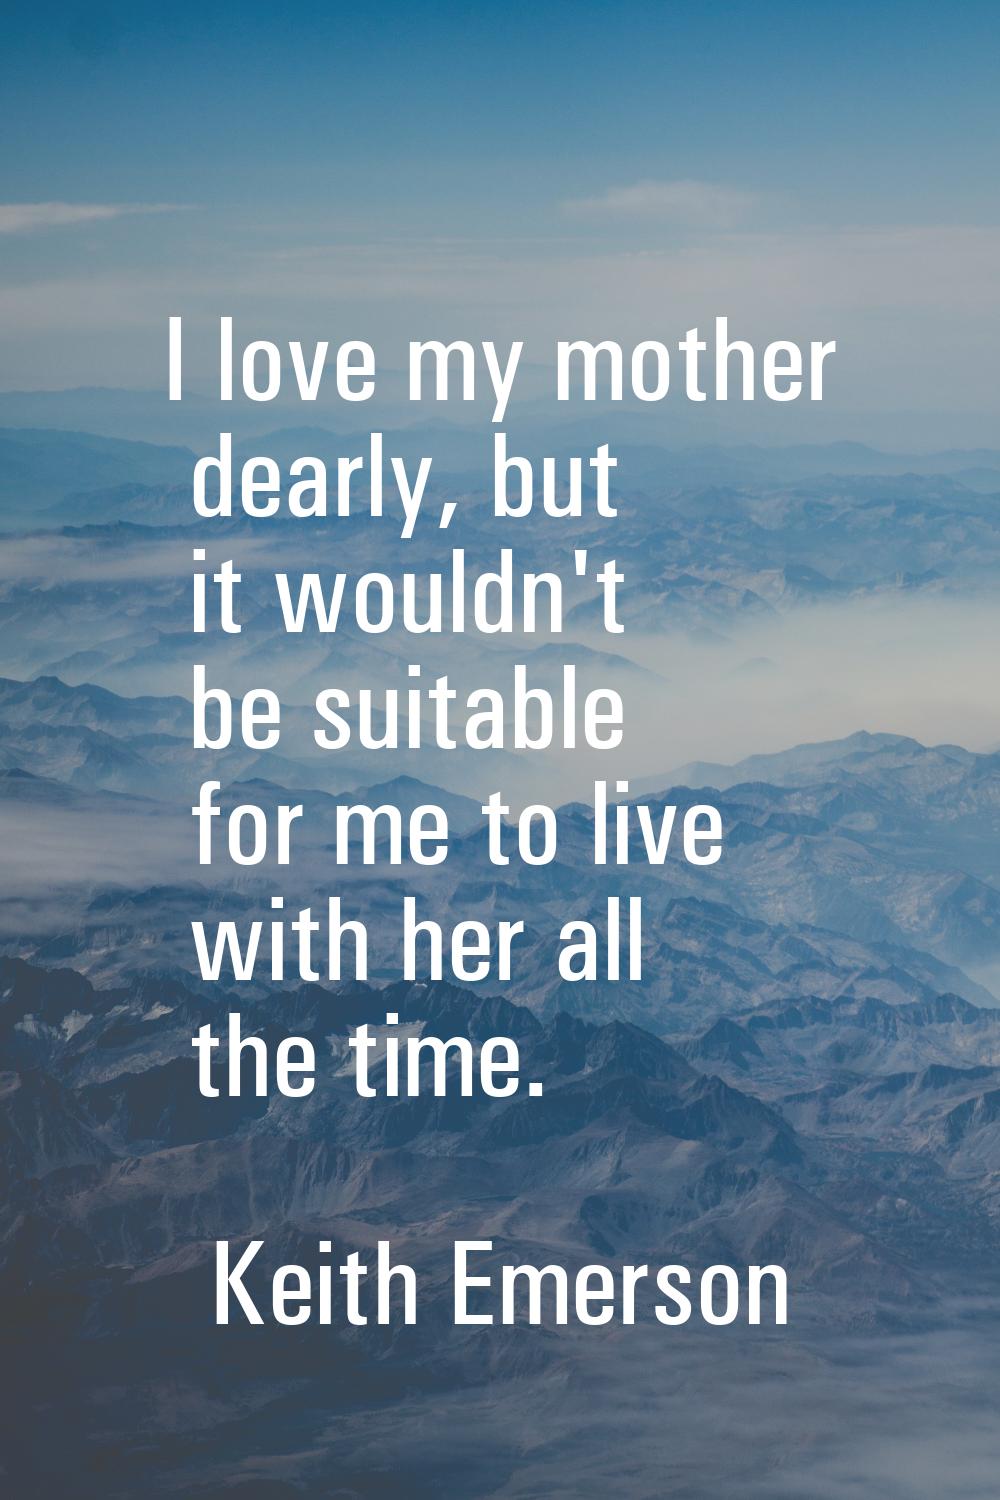 I love my mother dearly, but it wouldn't be suitable for me to live with her all the time.